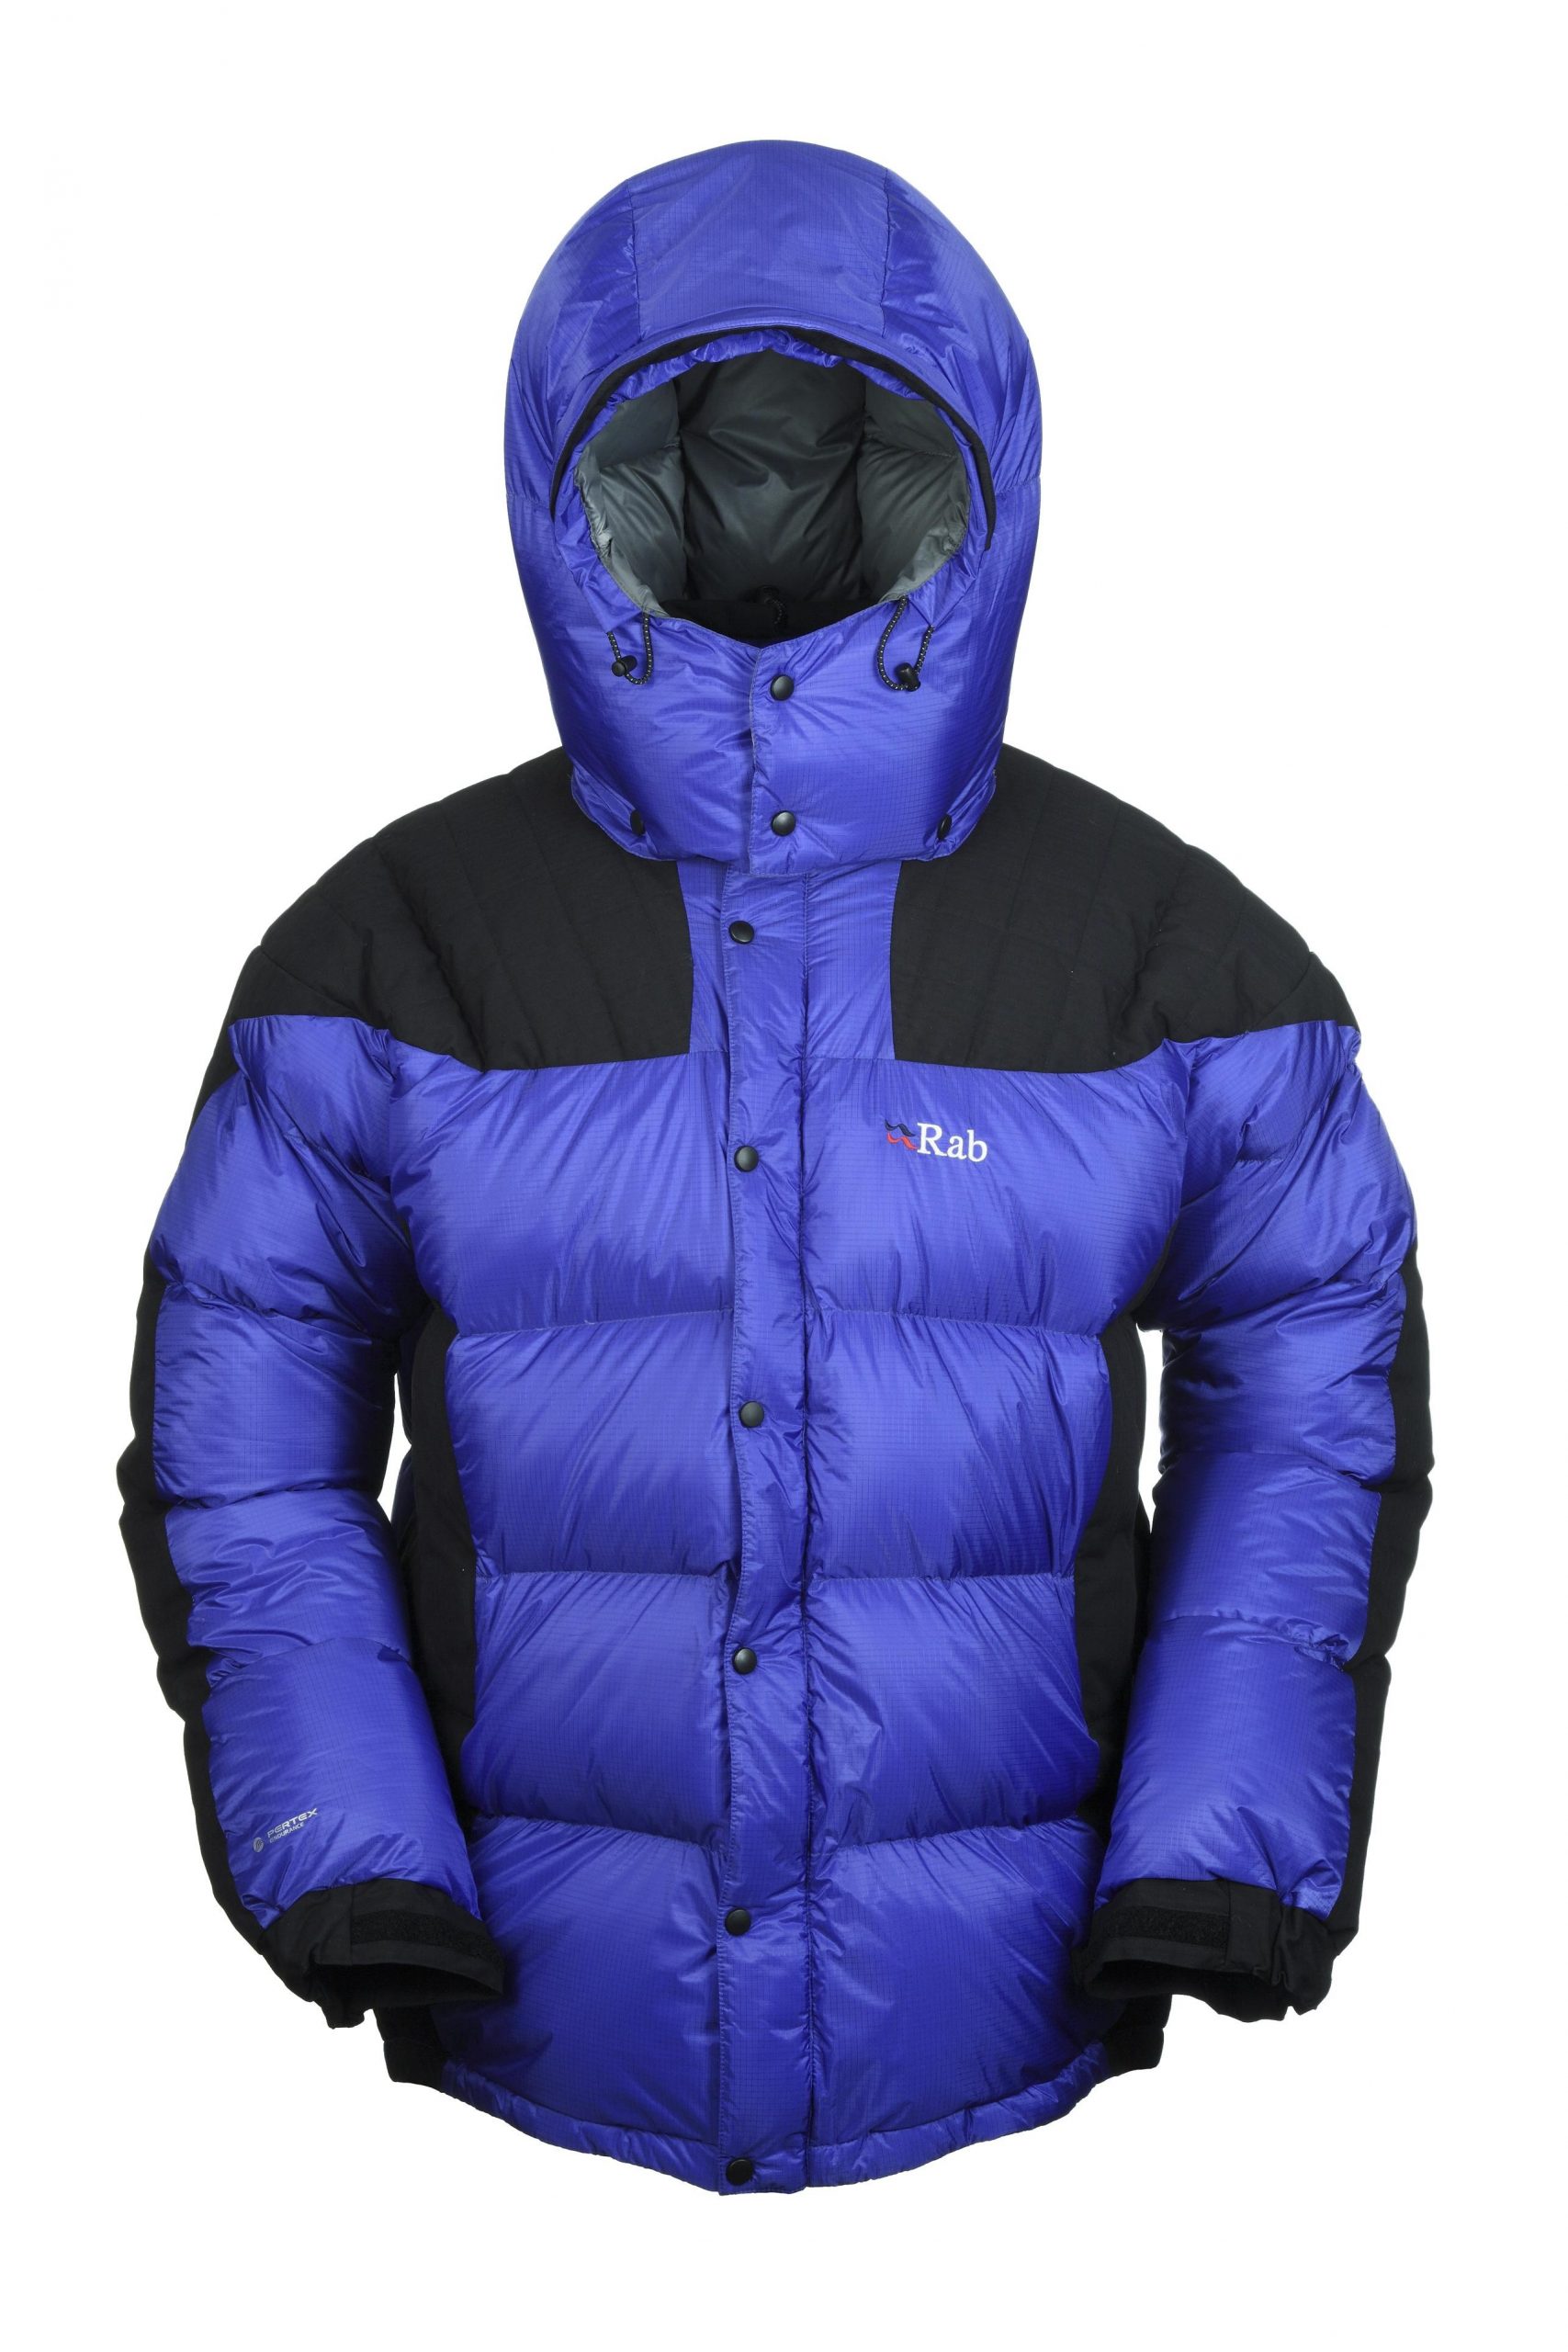 How To Buy A Rab Down Jacket